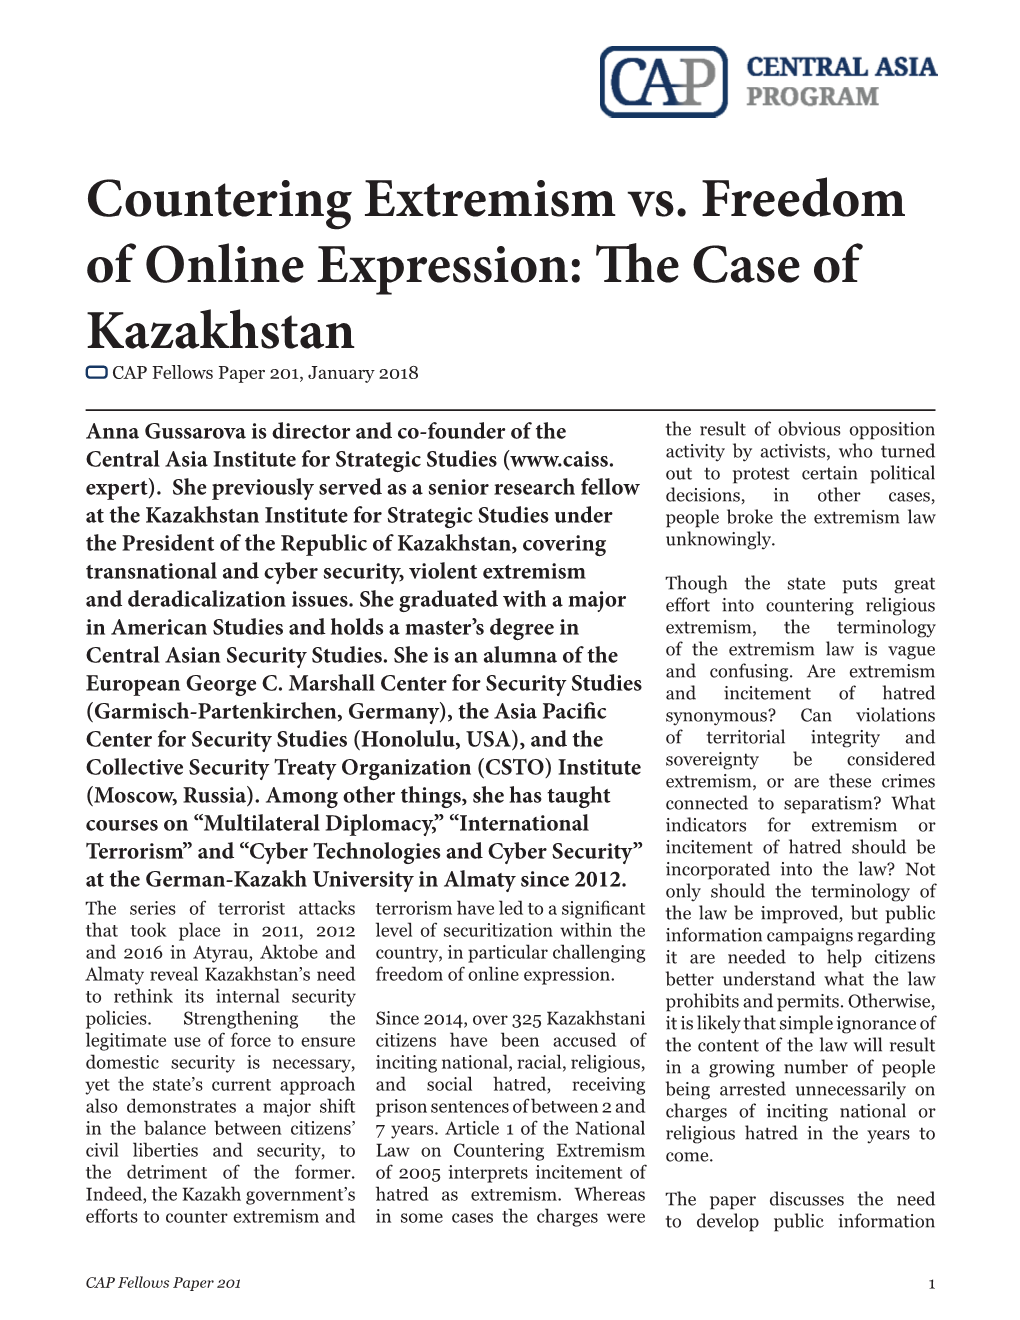 Countering Extremism Vs. Freedom of Online Expression: the Case of Kazakhstan CAP Fellows Paper 201, January 2018